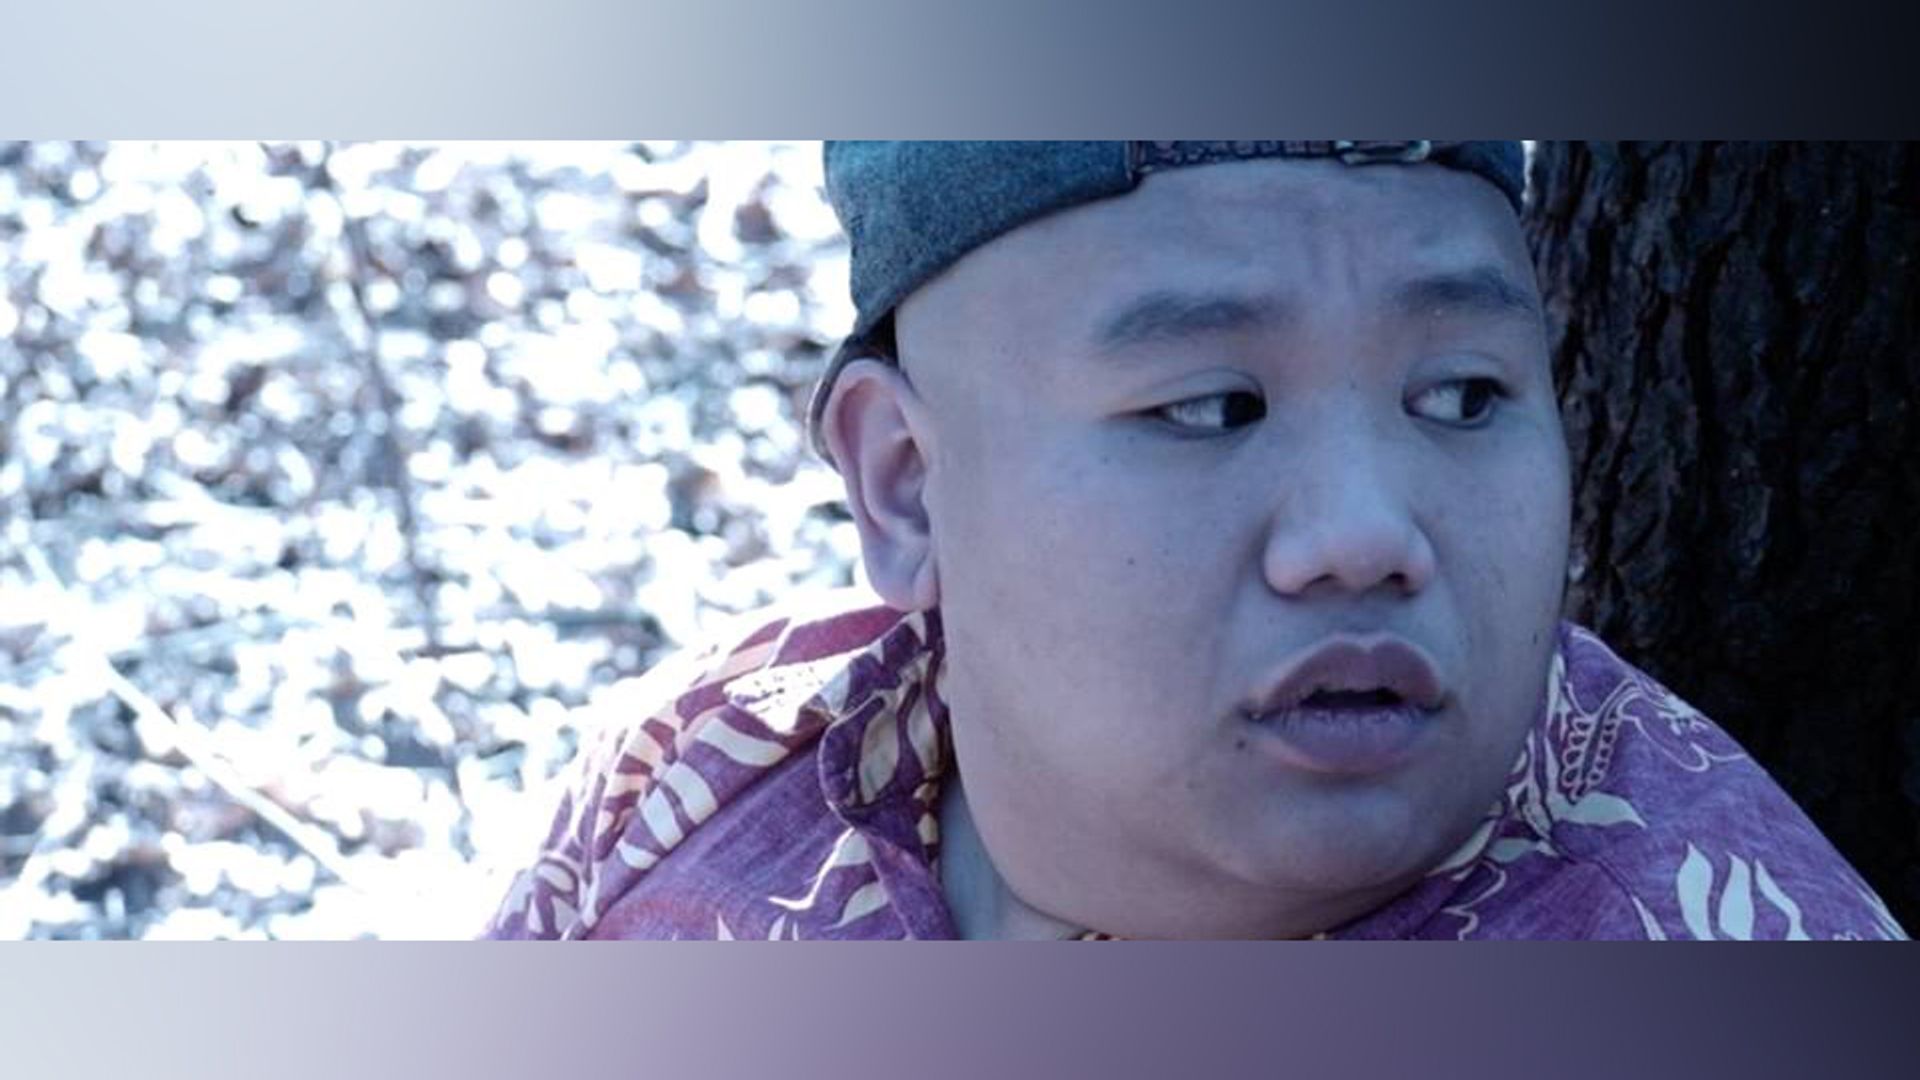 The first role of Jacob Batalon